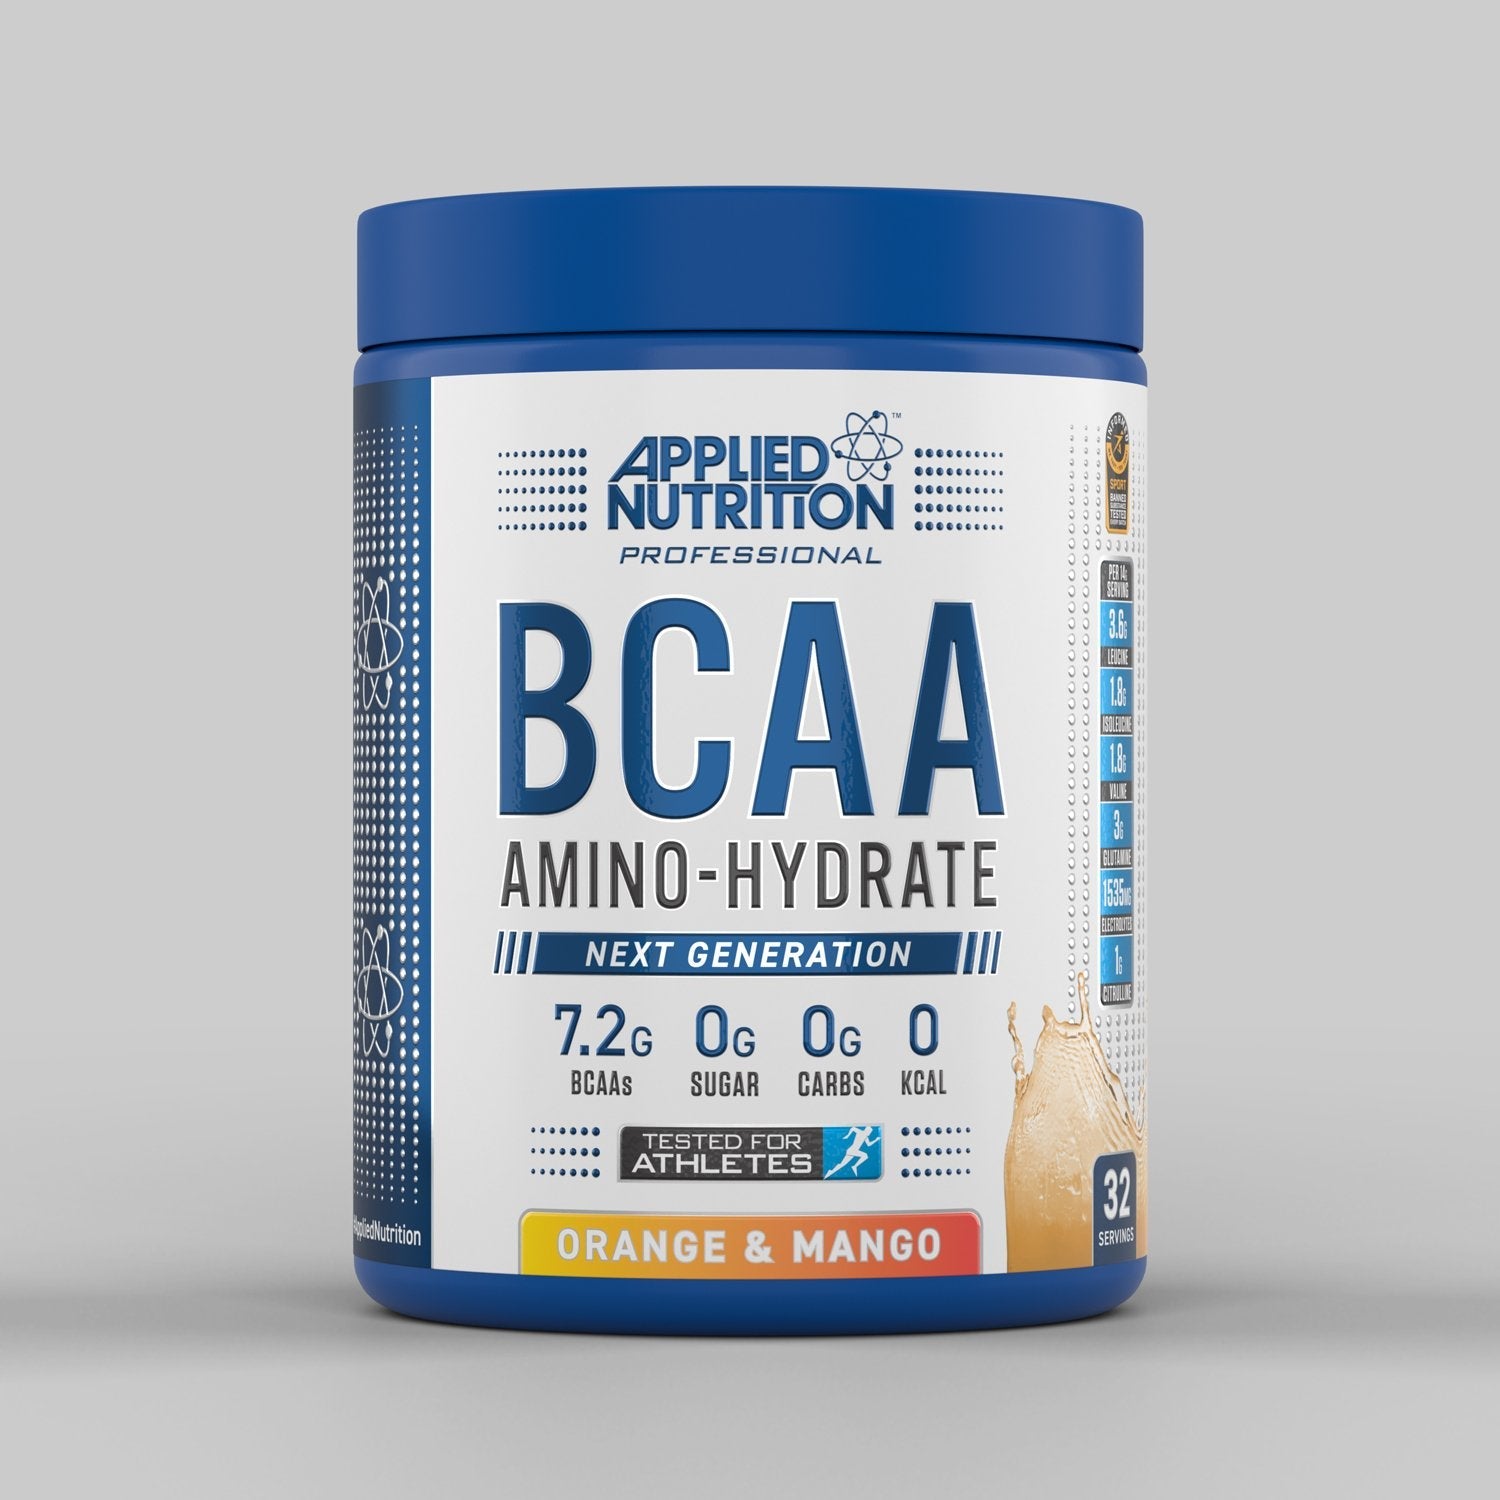 Applied Nutrition BCAA AminoHydrate 450g Powder